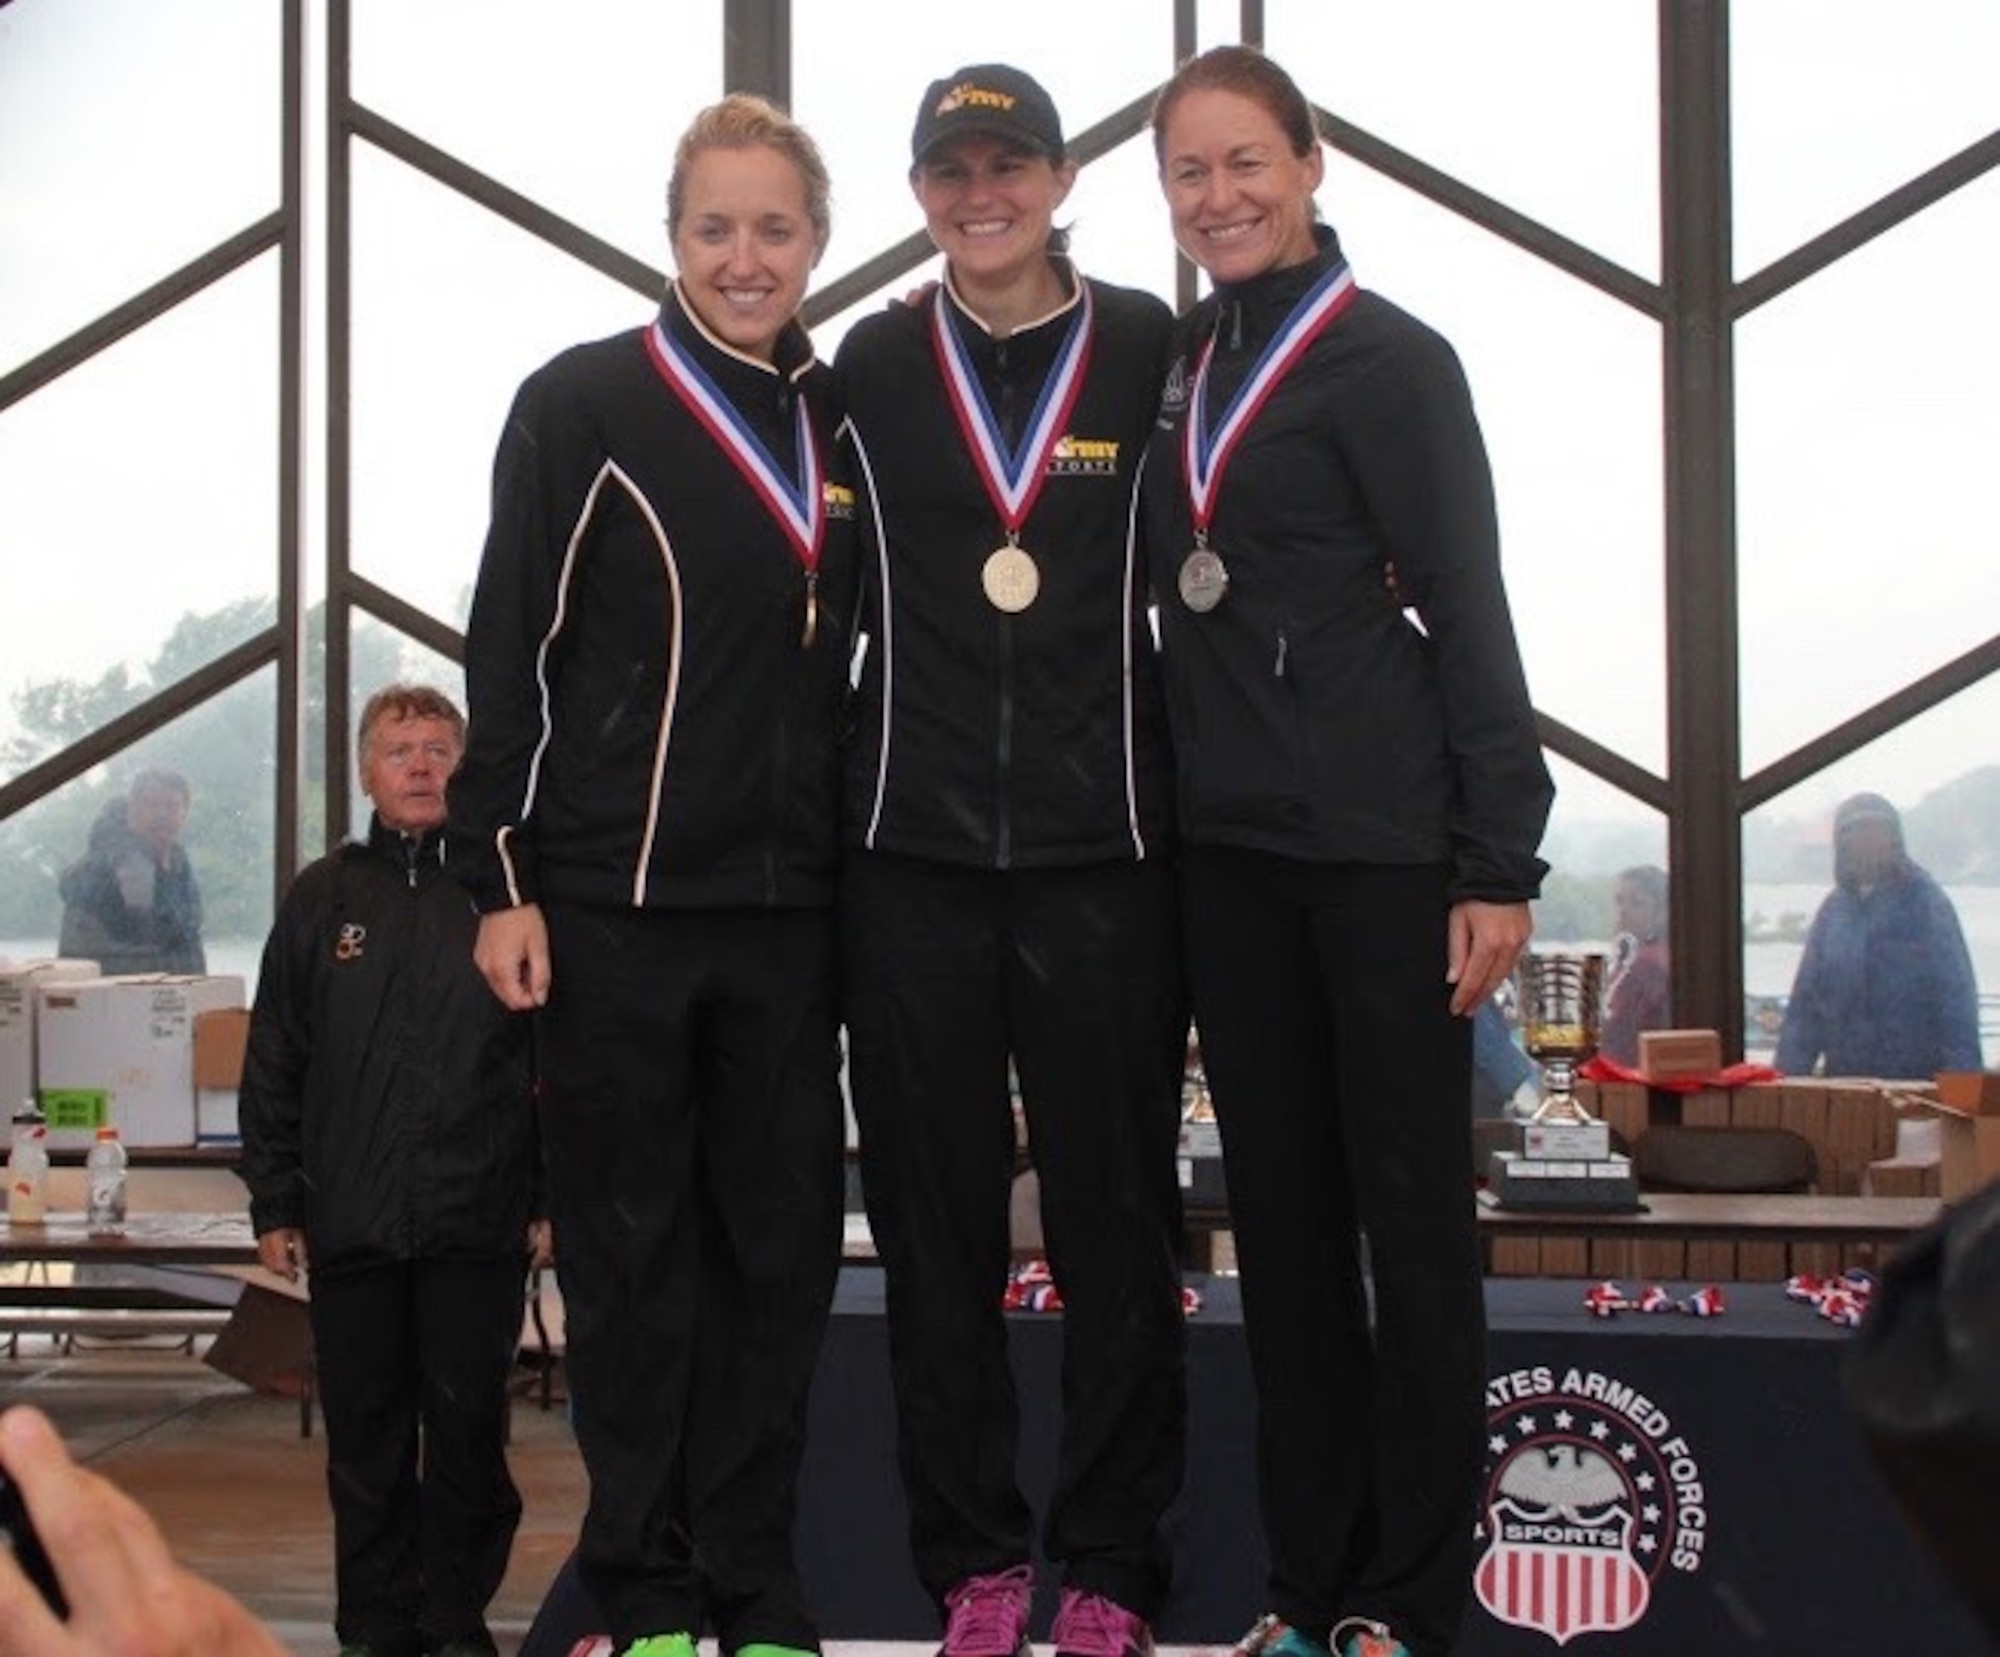 Maj. Jamie Turner proudly stands on the winners’ podium with 2nd Lt. Samone Franzese and 2nd Lt. Jessica Clay at the Armed Forces Triathlon Championship race in Hammond, Indiana, June 7, 2015. Turner (right) continued her world-class triathlete success as the second female to cross the finish line and automatically qualified as one of six athletes to compete on the women’s team at the Military World Games in Mungyeong, South Korea, Oct. 2-11, 2015. Turner is a C-17 pilot with the 317th Airlift Squadron. Franzese, a medical student with the U.S. Army, finished first, and Clay, from Camp Casey, Korea finished third in the competition. (Courtesy photo)